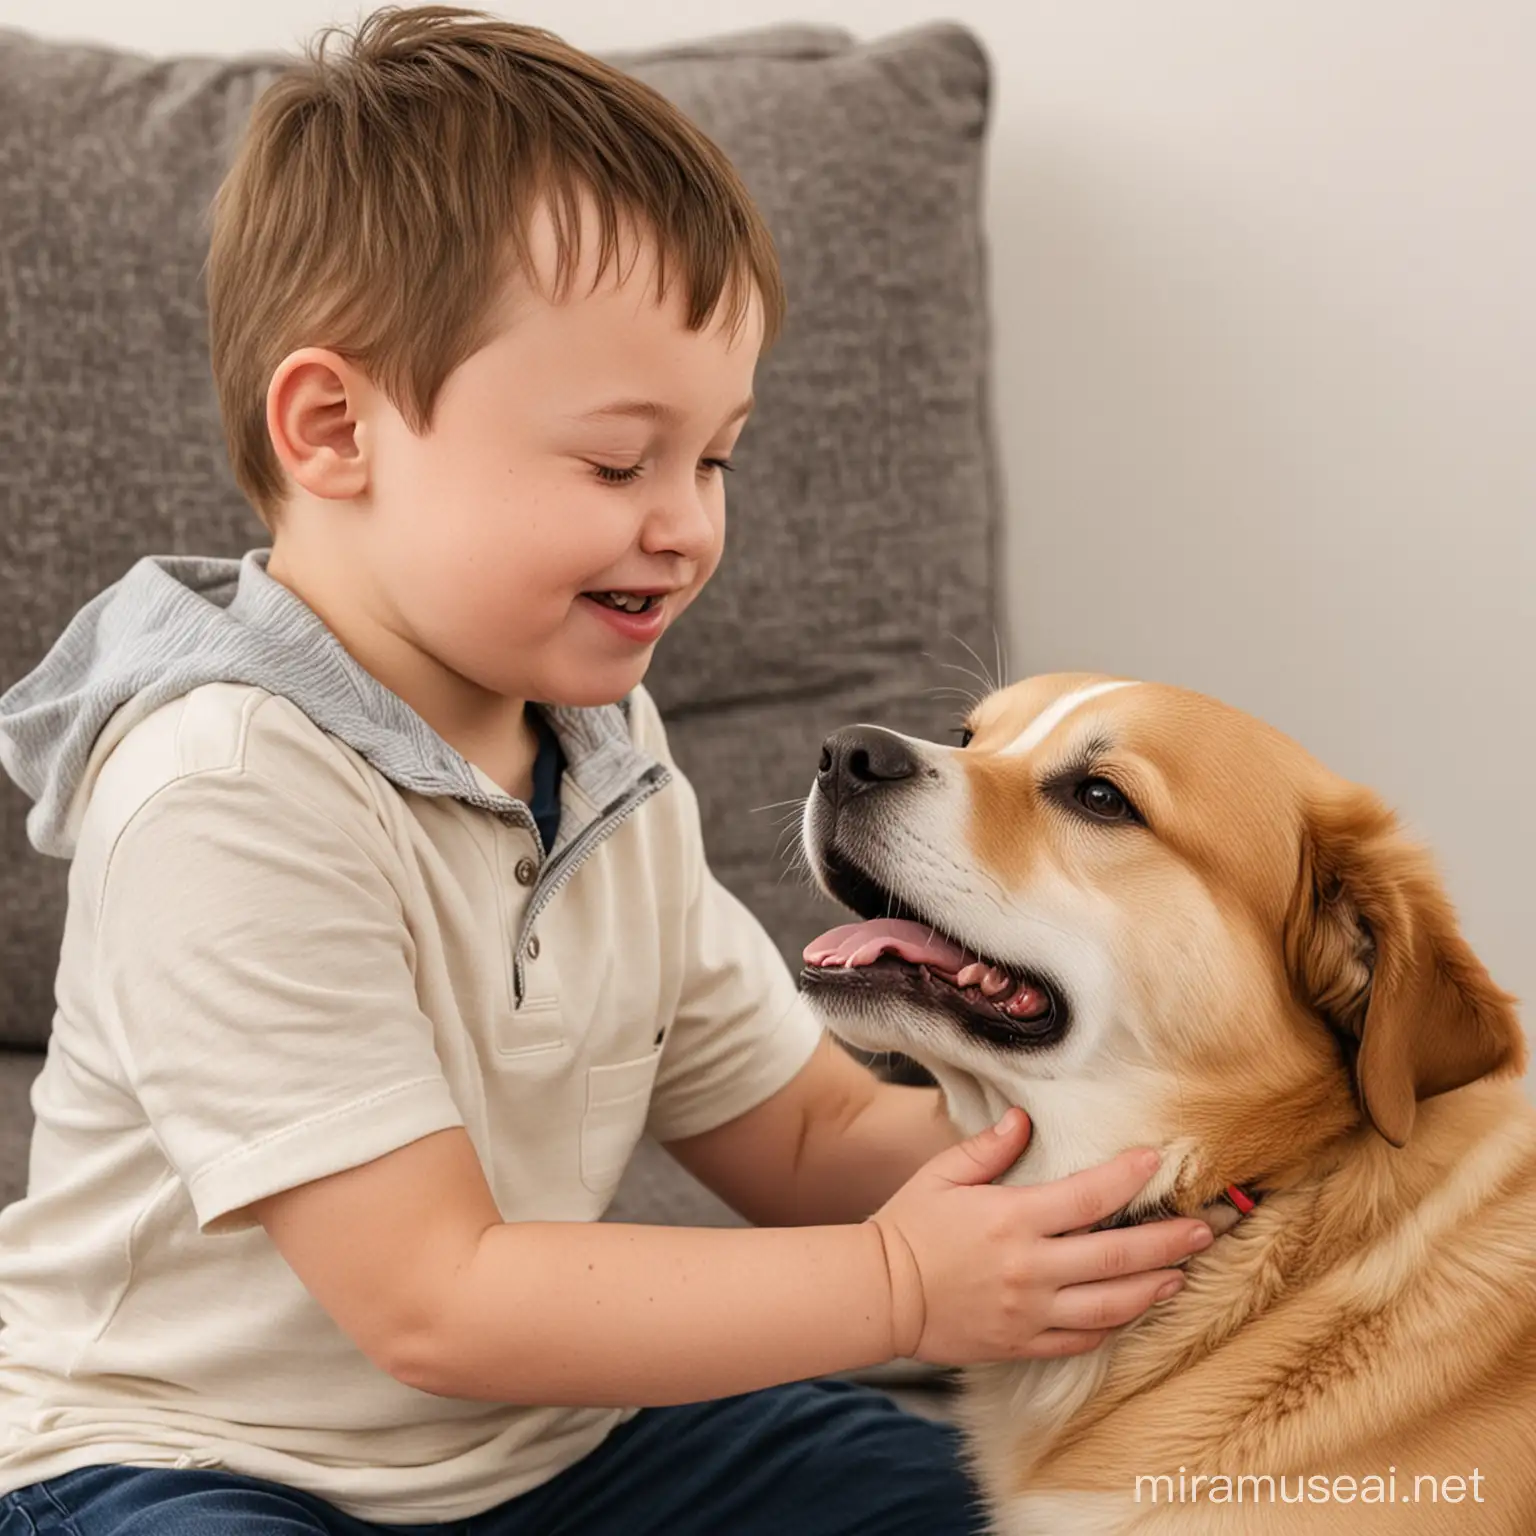 Boy with Down Syndrome Gently Petting a Loyal Dog